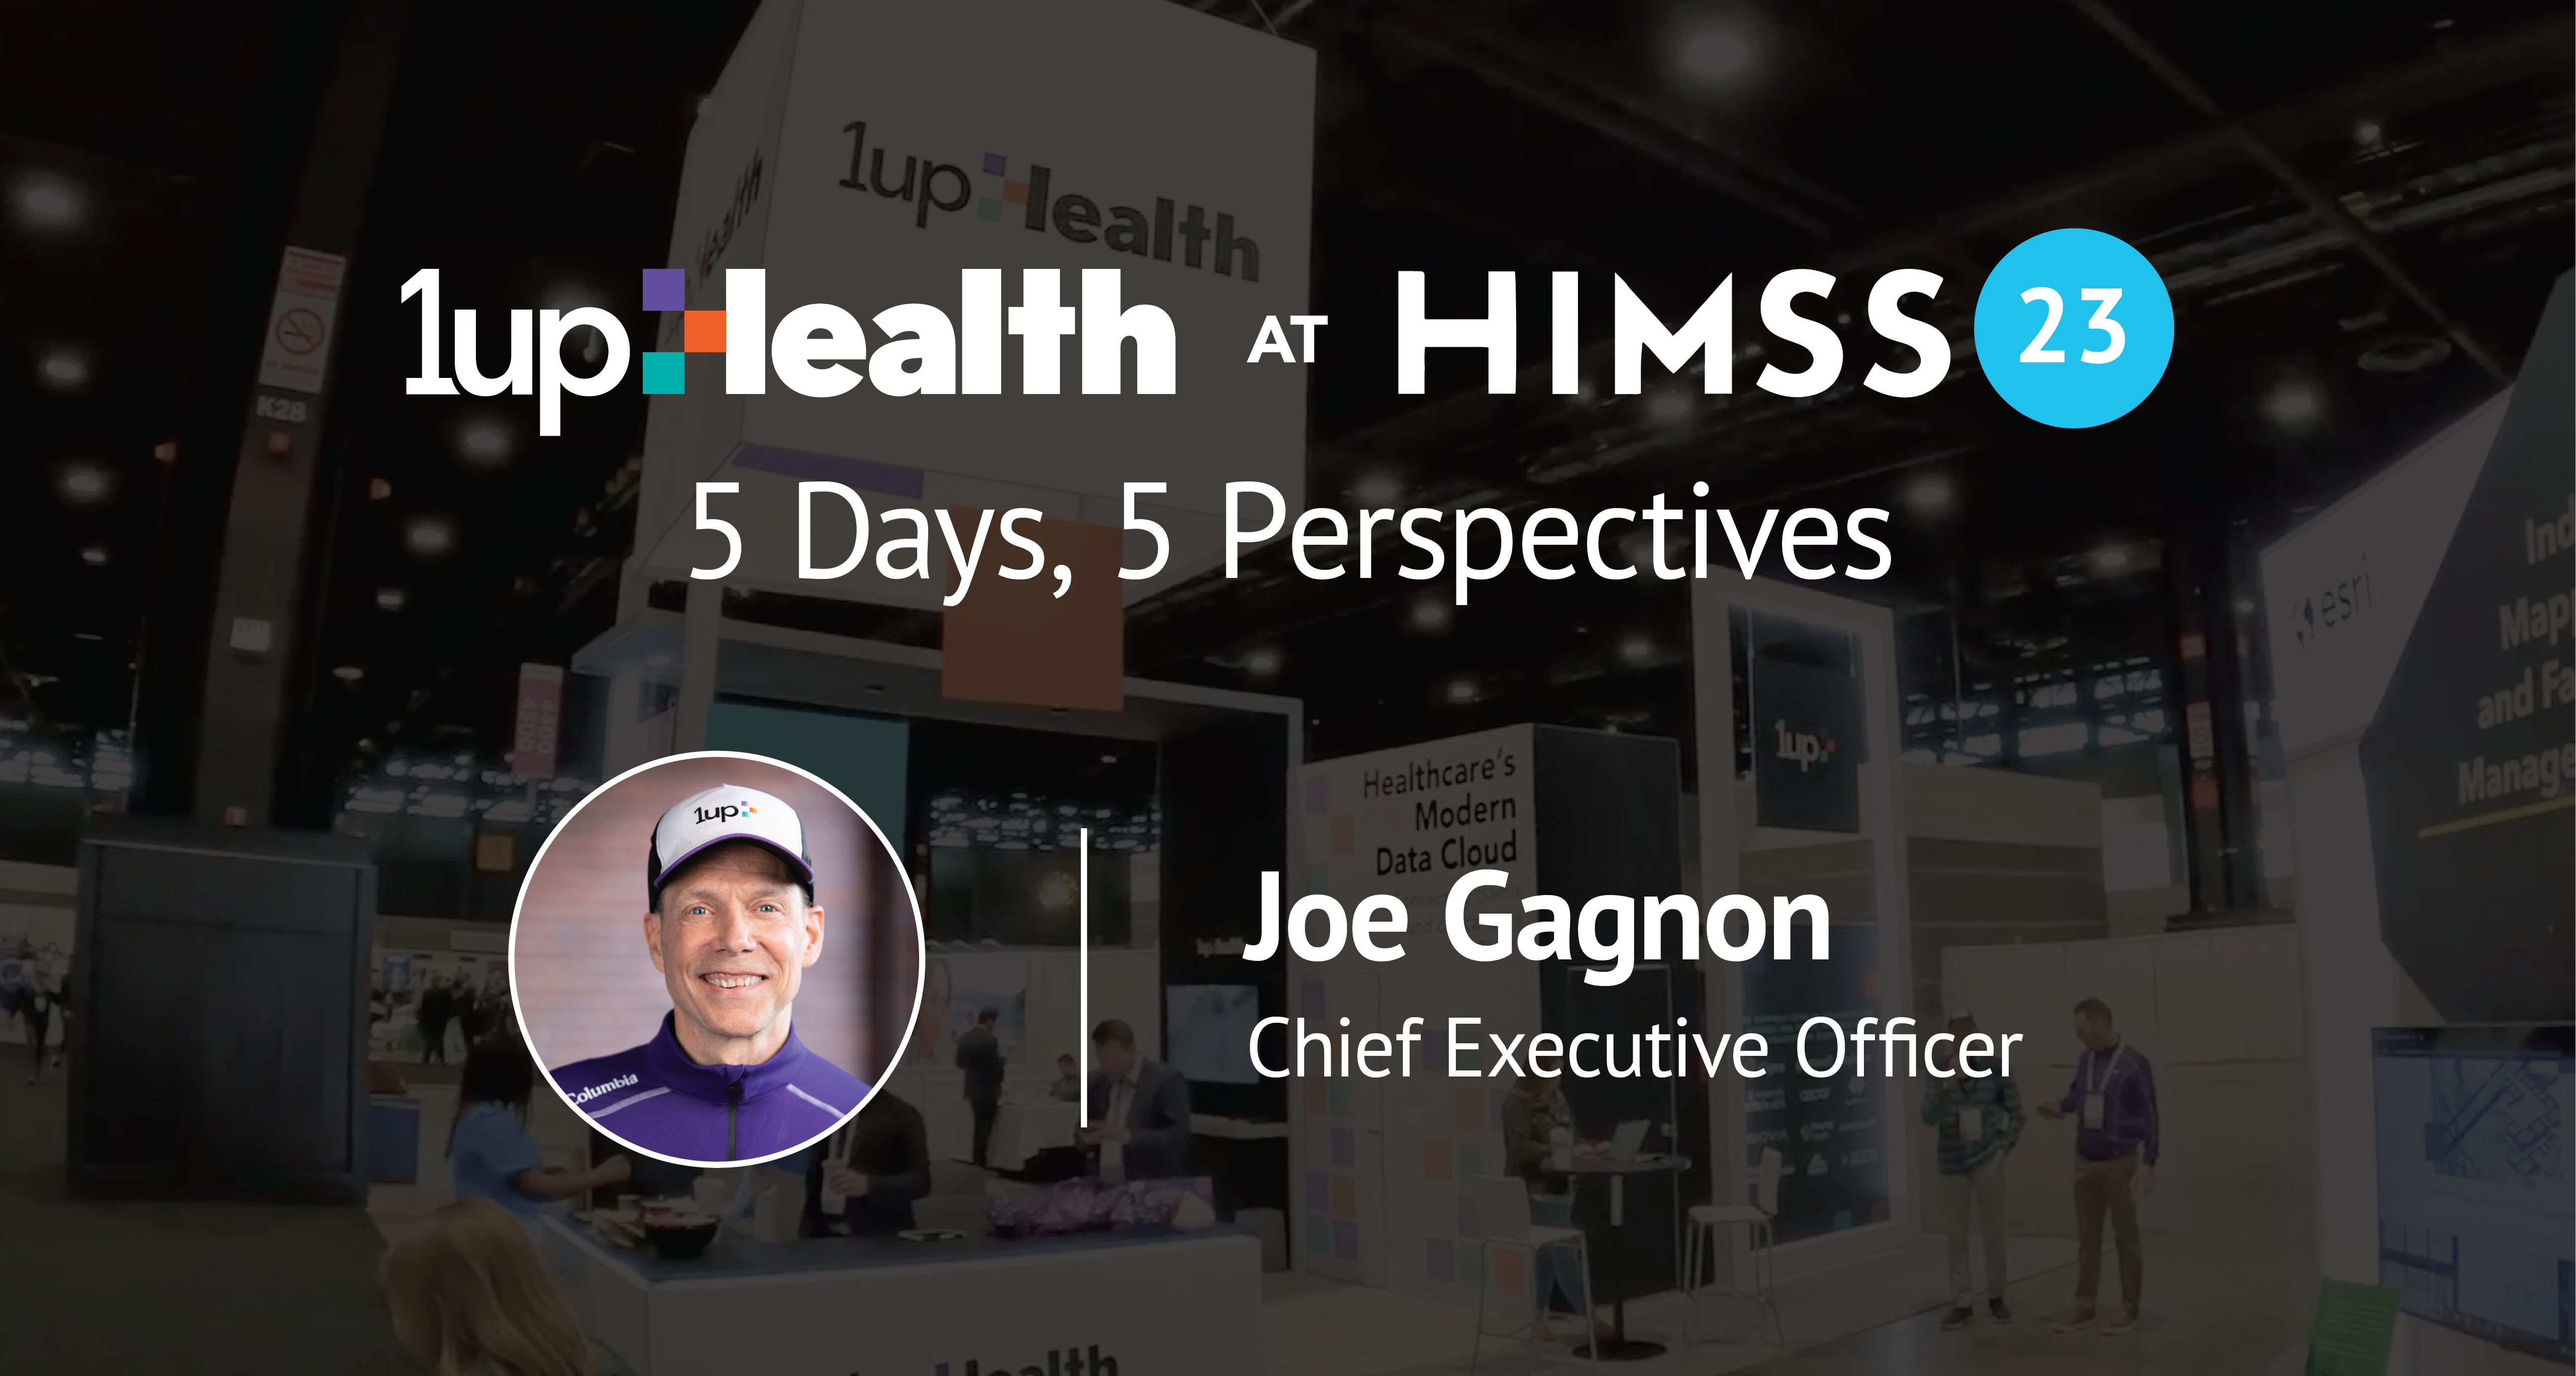 1upHealth at HIMSS23 5 Days, 5 Perspectives with Joe Gagnon Chief Executive Officer